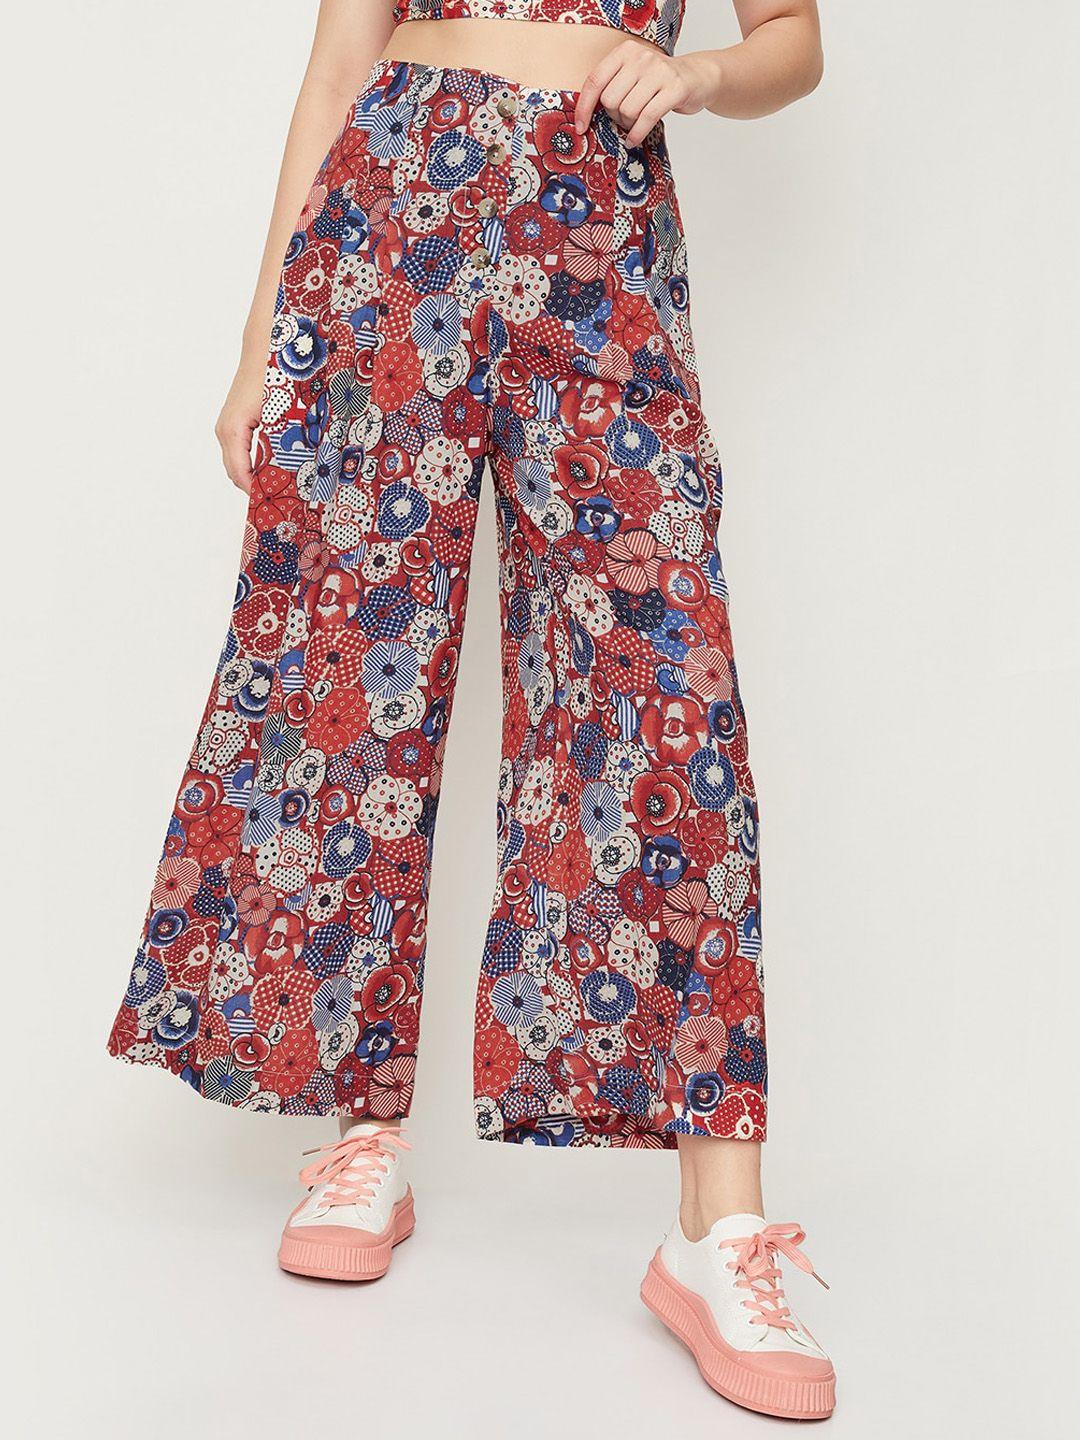 max-women-floral-printed-parallel-trousers